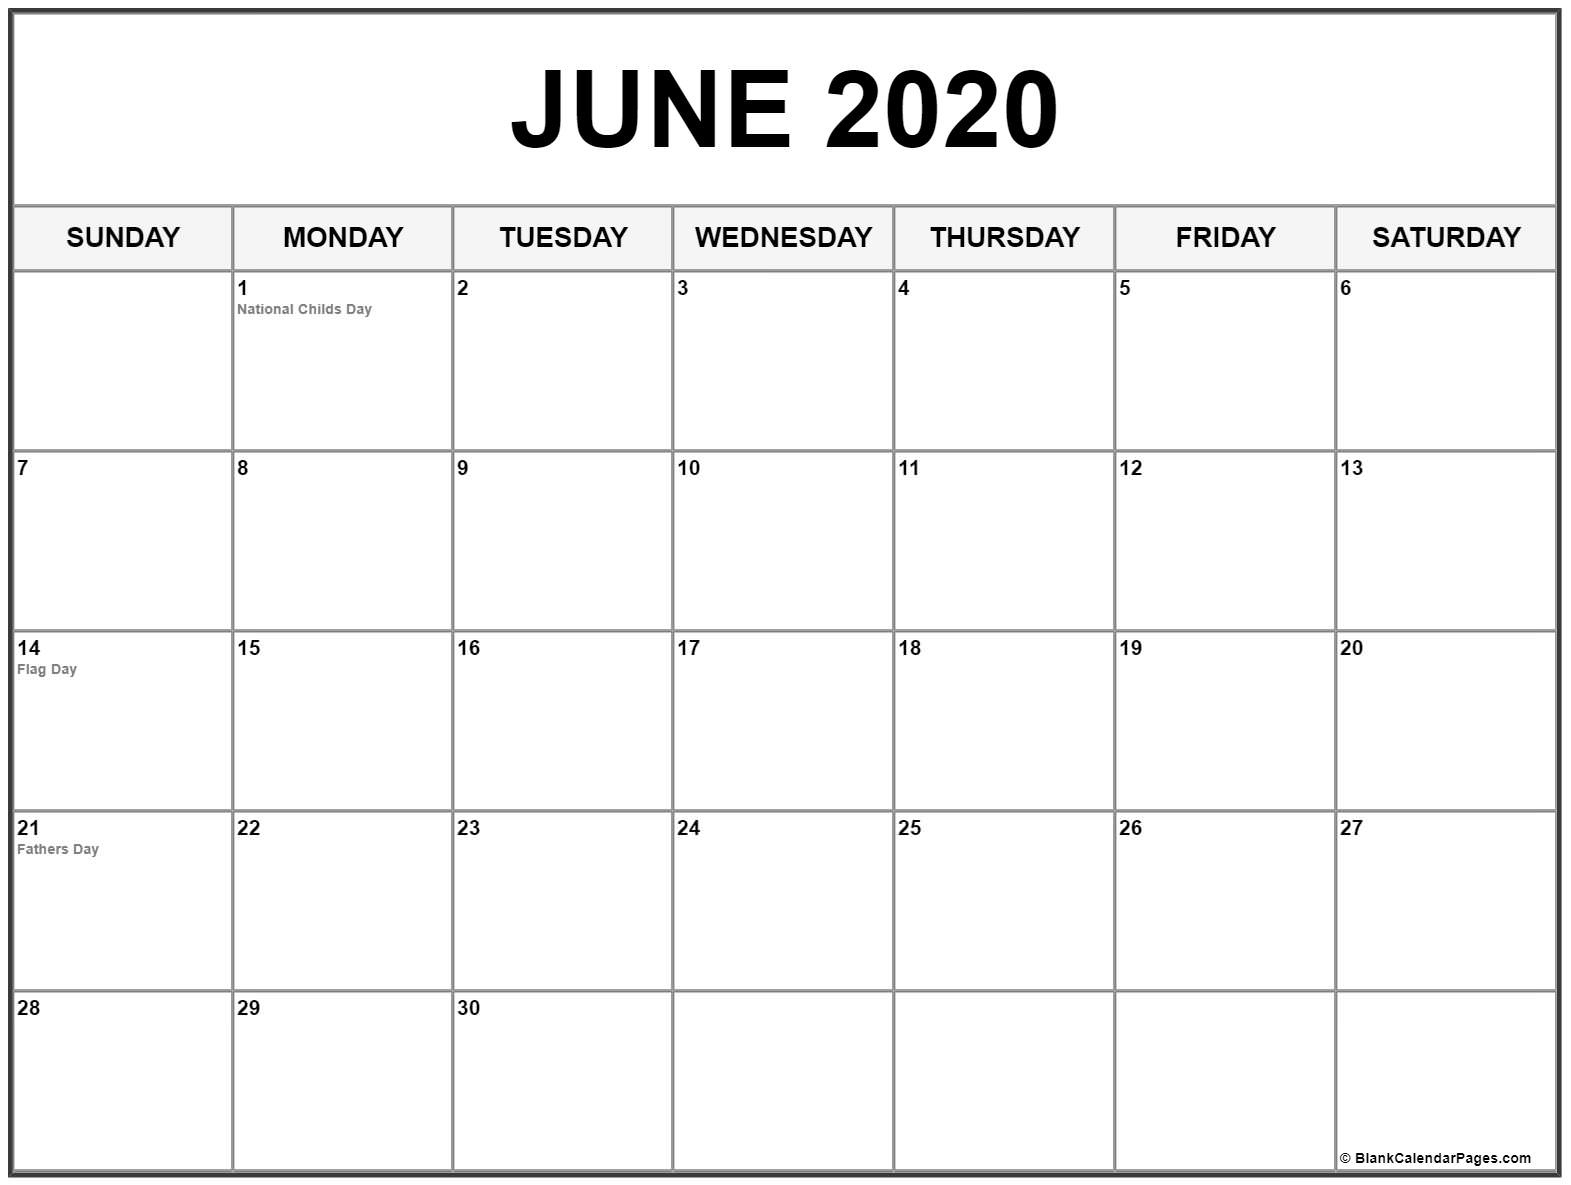 Collection Of June 2020 Calendars With Holidays Incredible June 2020 Calendar With Holidays